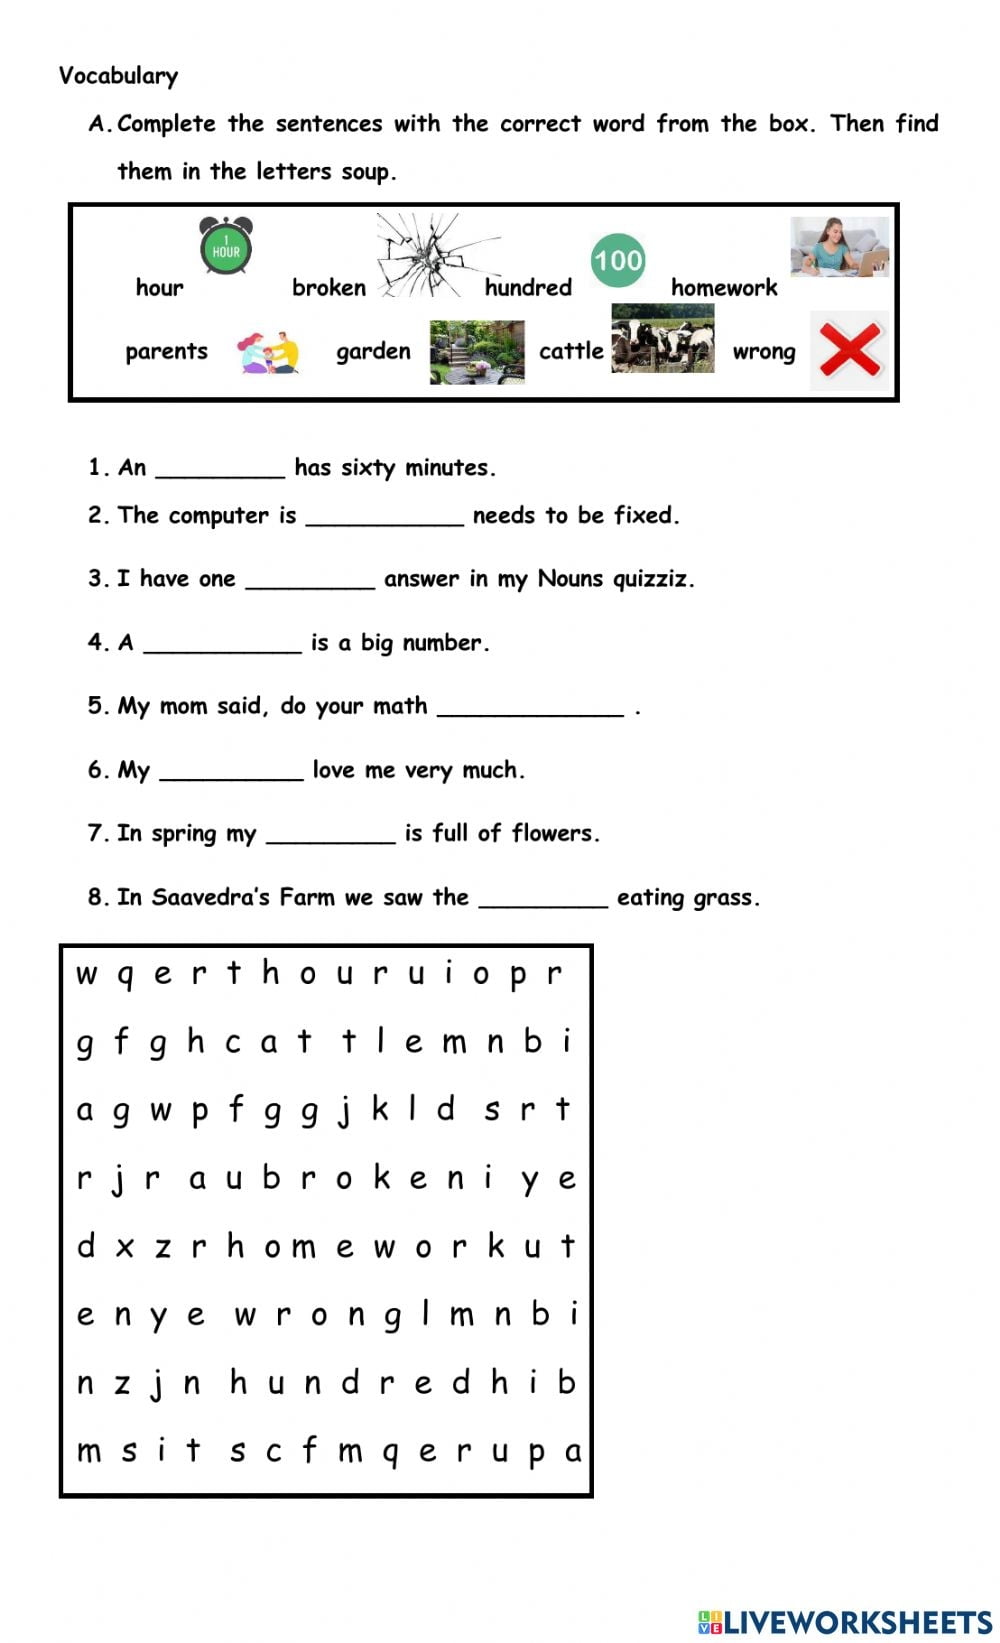 Reading Comprehension Vocabulary Worksheets